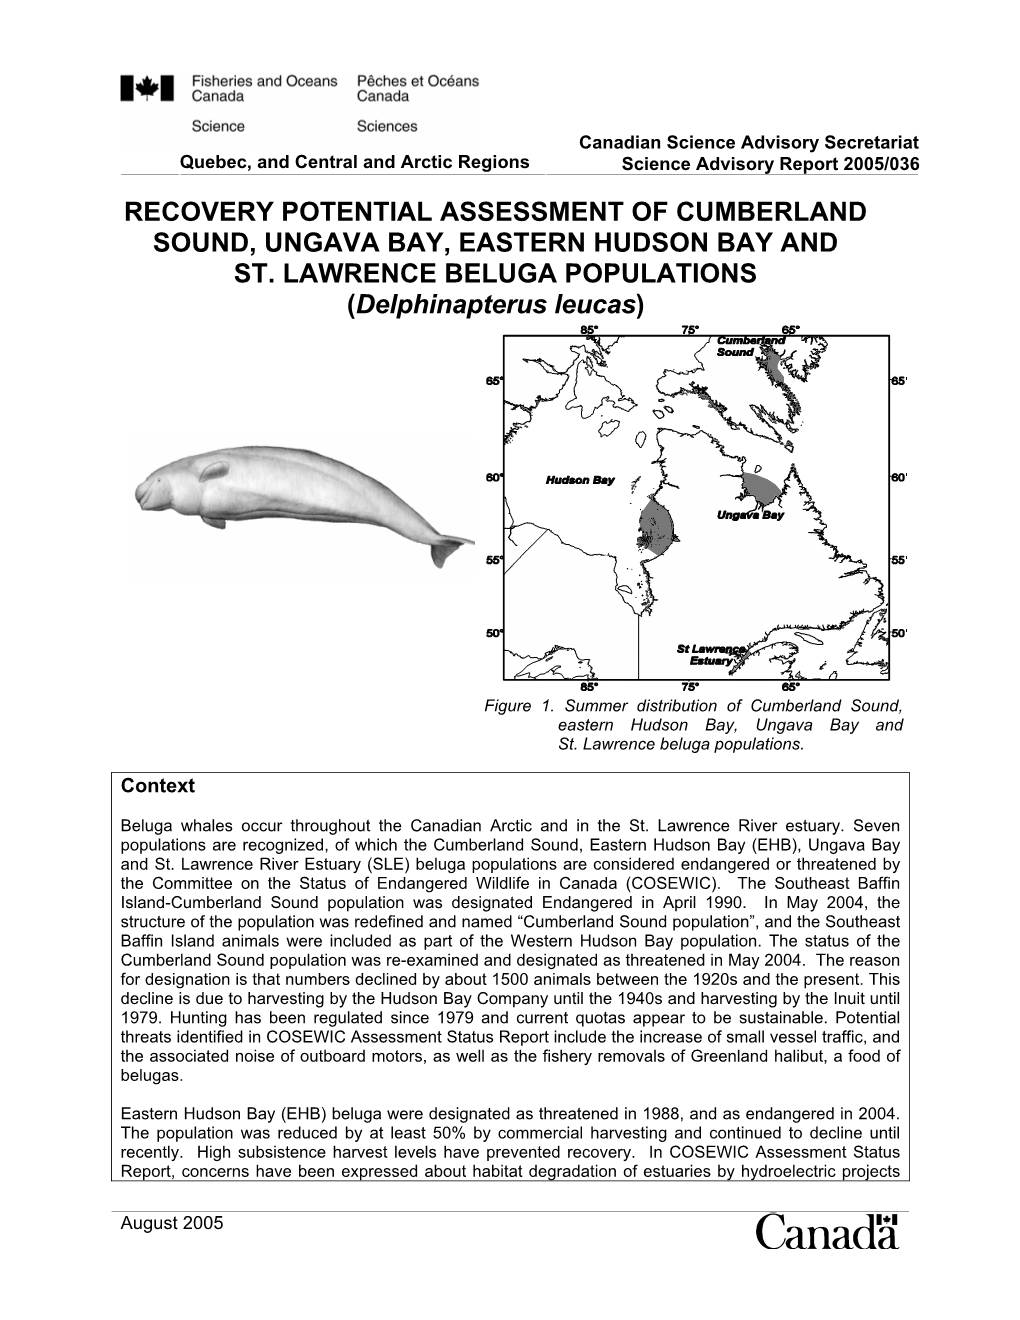 RECOVERY POTENTIAL ASSESSMENT of CUMBERLAND SOUND, UNGAVA BAY, EASTERN HUDSON BAY and ST. LAWRENCE BELUGA POPULATIONS (Delphinapterus Leucas)